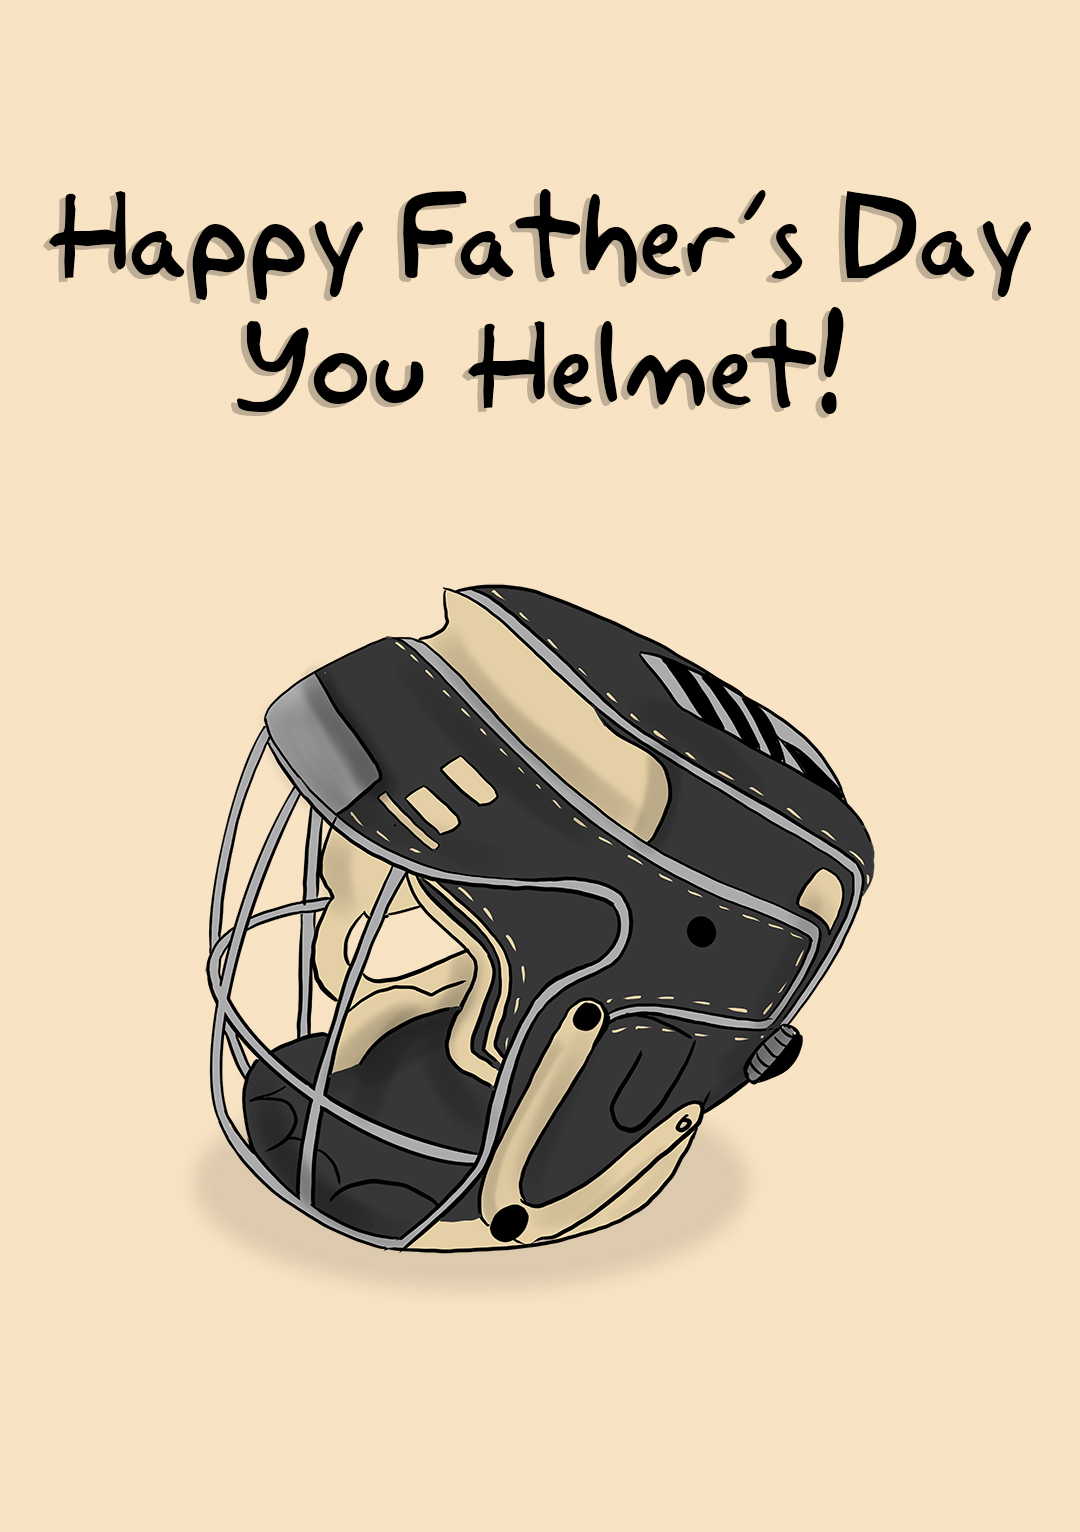 Happy Father's Day You Helmet!